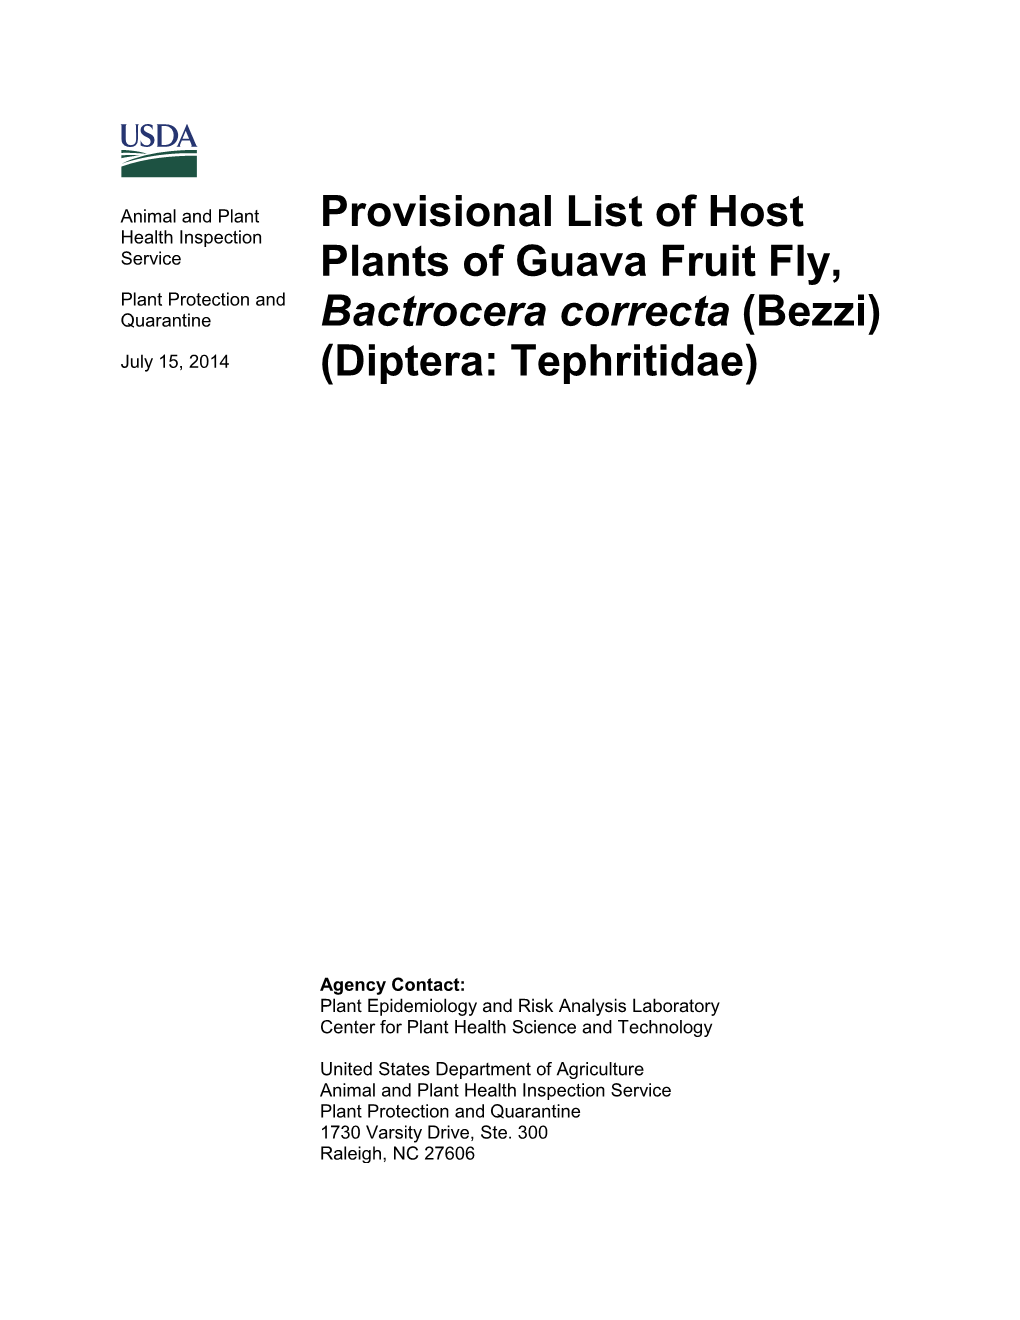 Provisional List of Host Plants of Guava Fruit Fly, Bactrocera Correcta